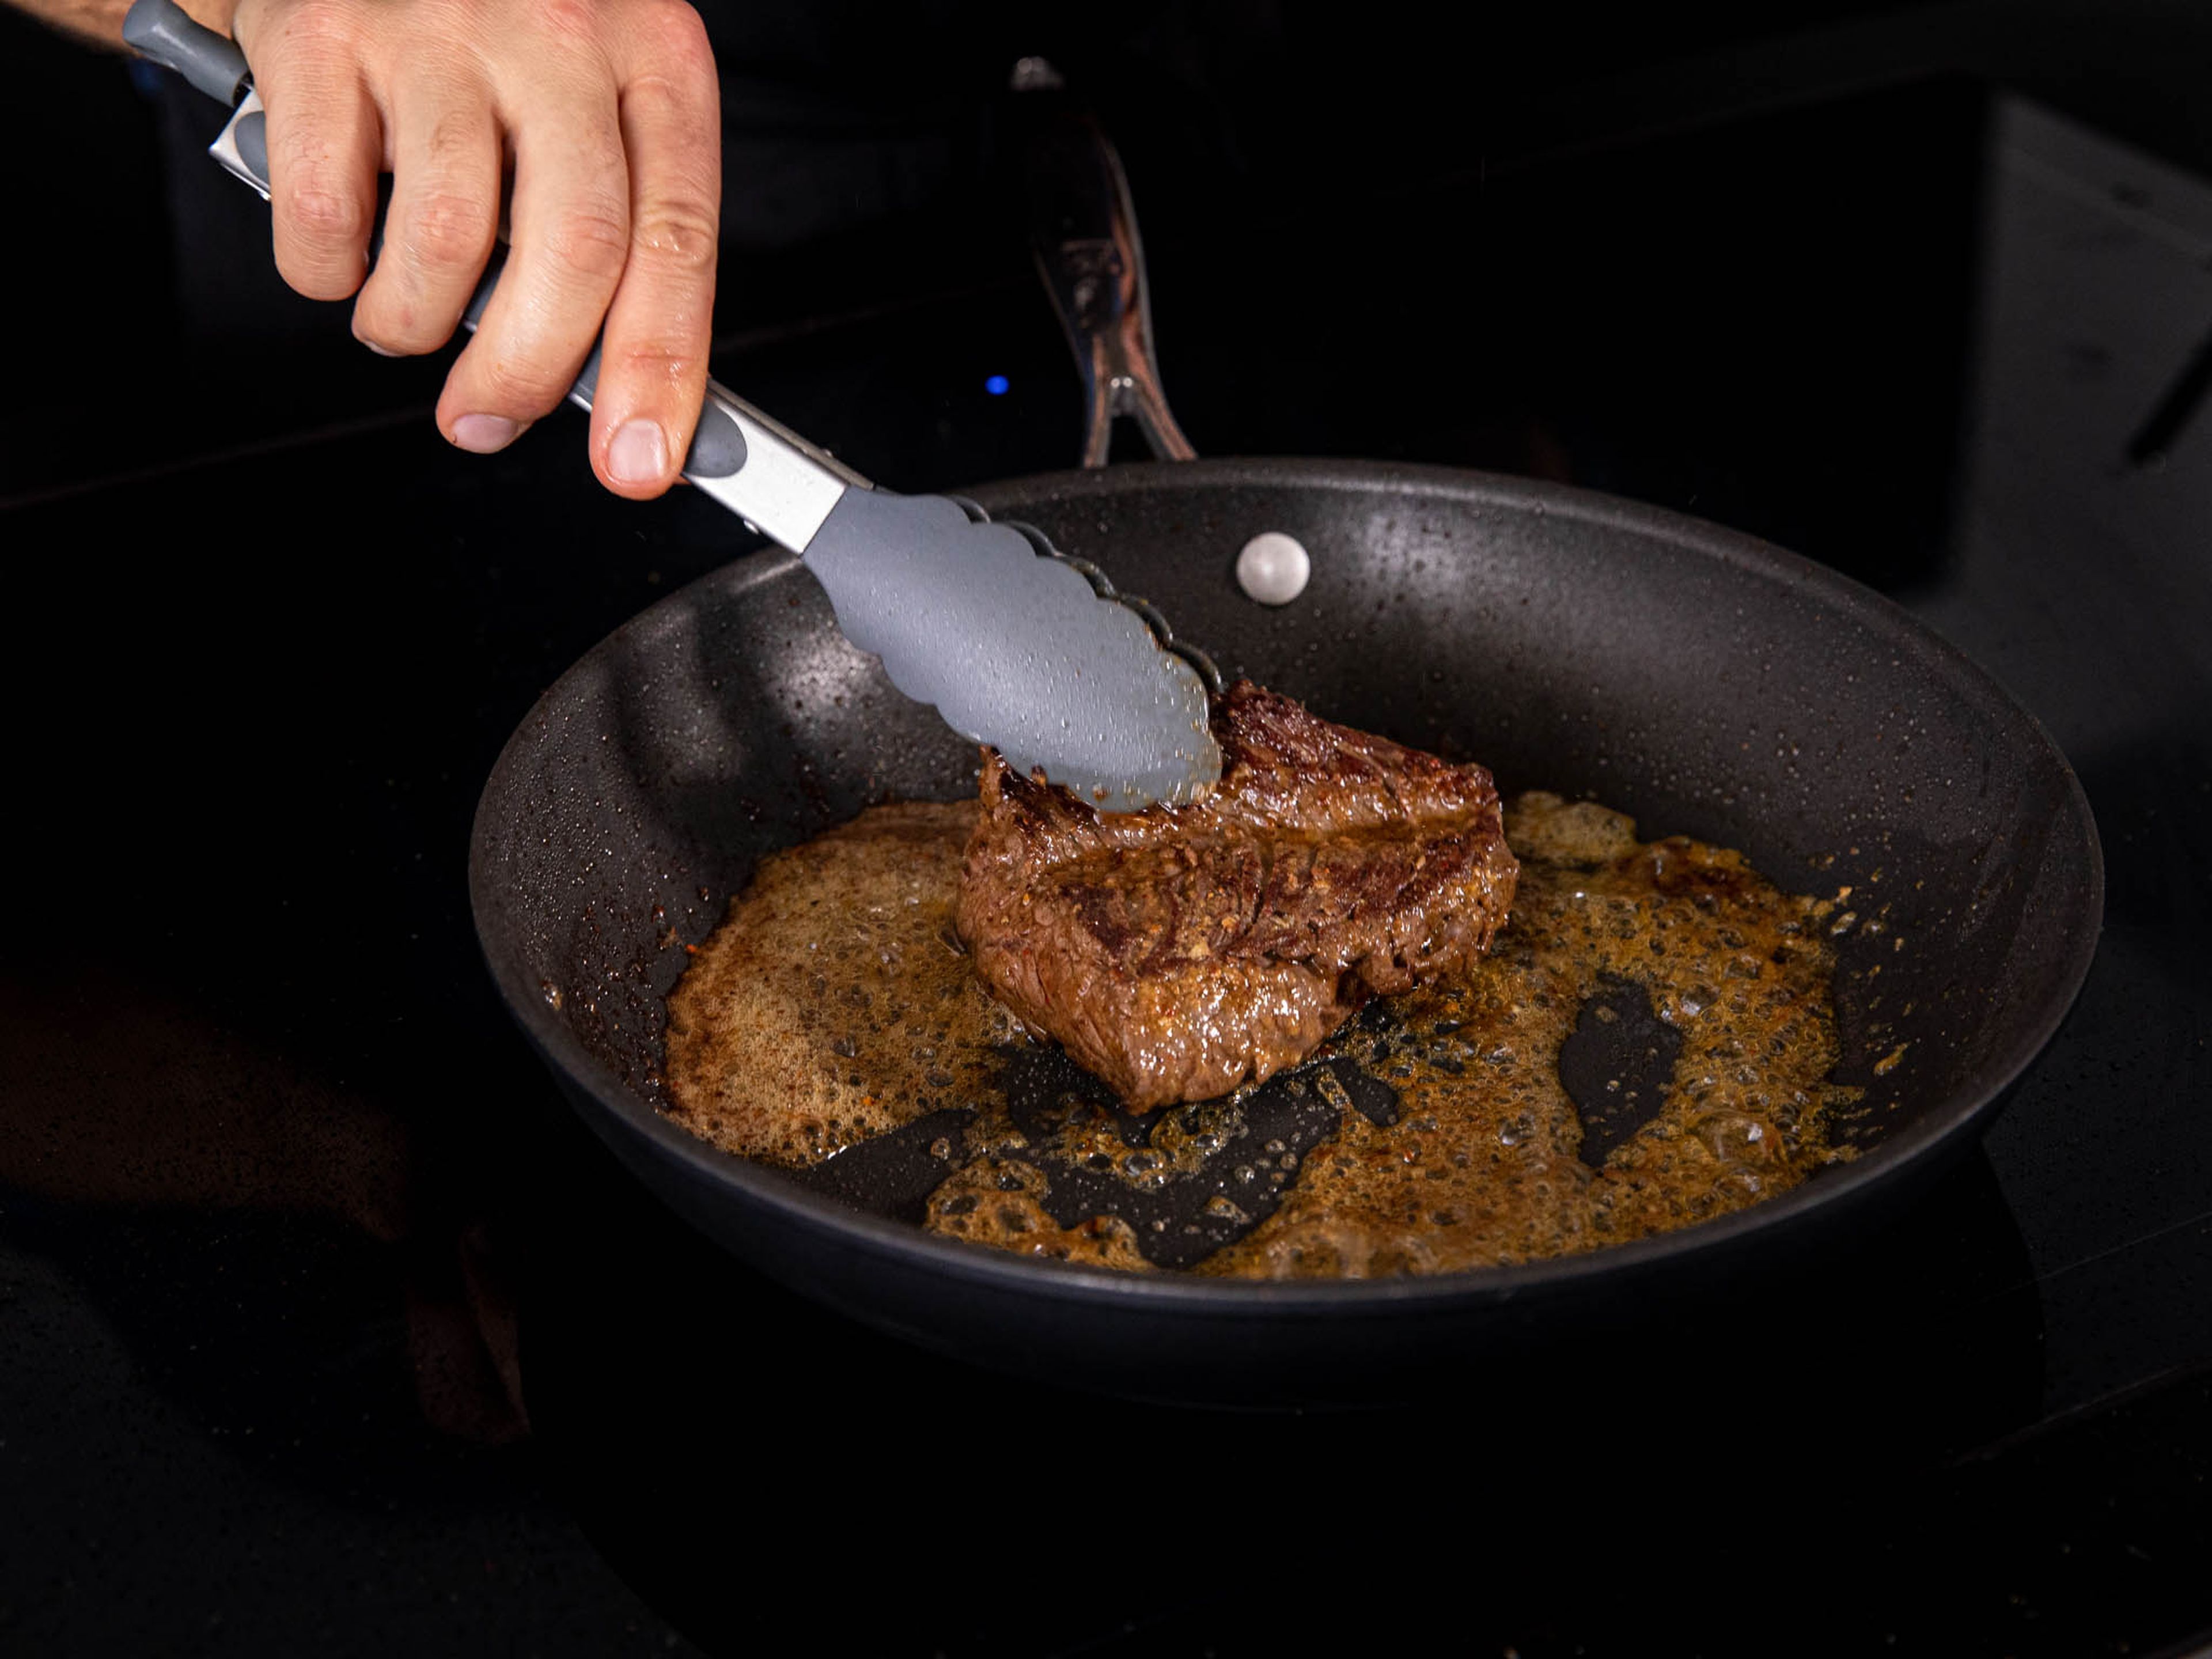 Place a non-stick frying pan over medium-high heat. Add the oil and allow to heat for 1 – 2 min. Season the steak with salt. When the pan is very hot, lay the steak in and leave it to sizzle and cook without touching it for 1 min. Flip the steak and cook for 1 min. more, then add roughly another third of the remaining butter, finishing the steak for 45 seconds on each side. If you have a food thermometer, check the middle of the steak is about 53°C/125°F, this will mean that once rested it’s a medium rare, perfect for this type of steak. Remove the steak and leave it on a warm plate or platter to rest for 4 min.